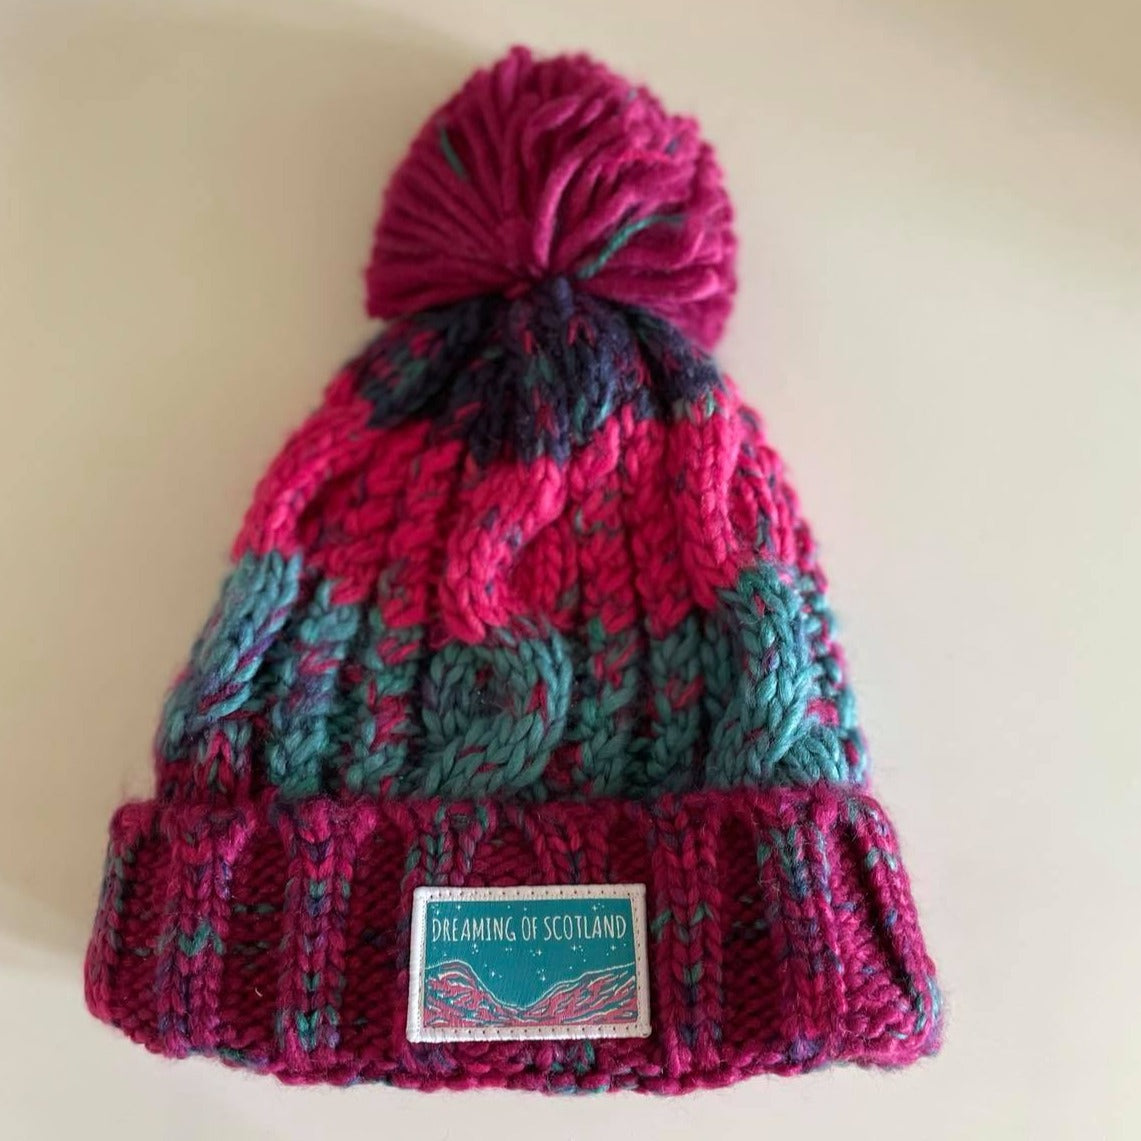 Dreaming of Scotland Infant Beanie in Pink + Blue